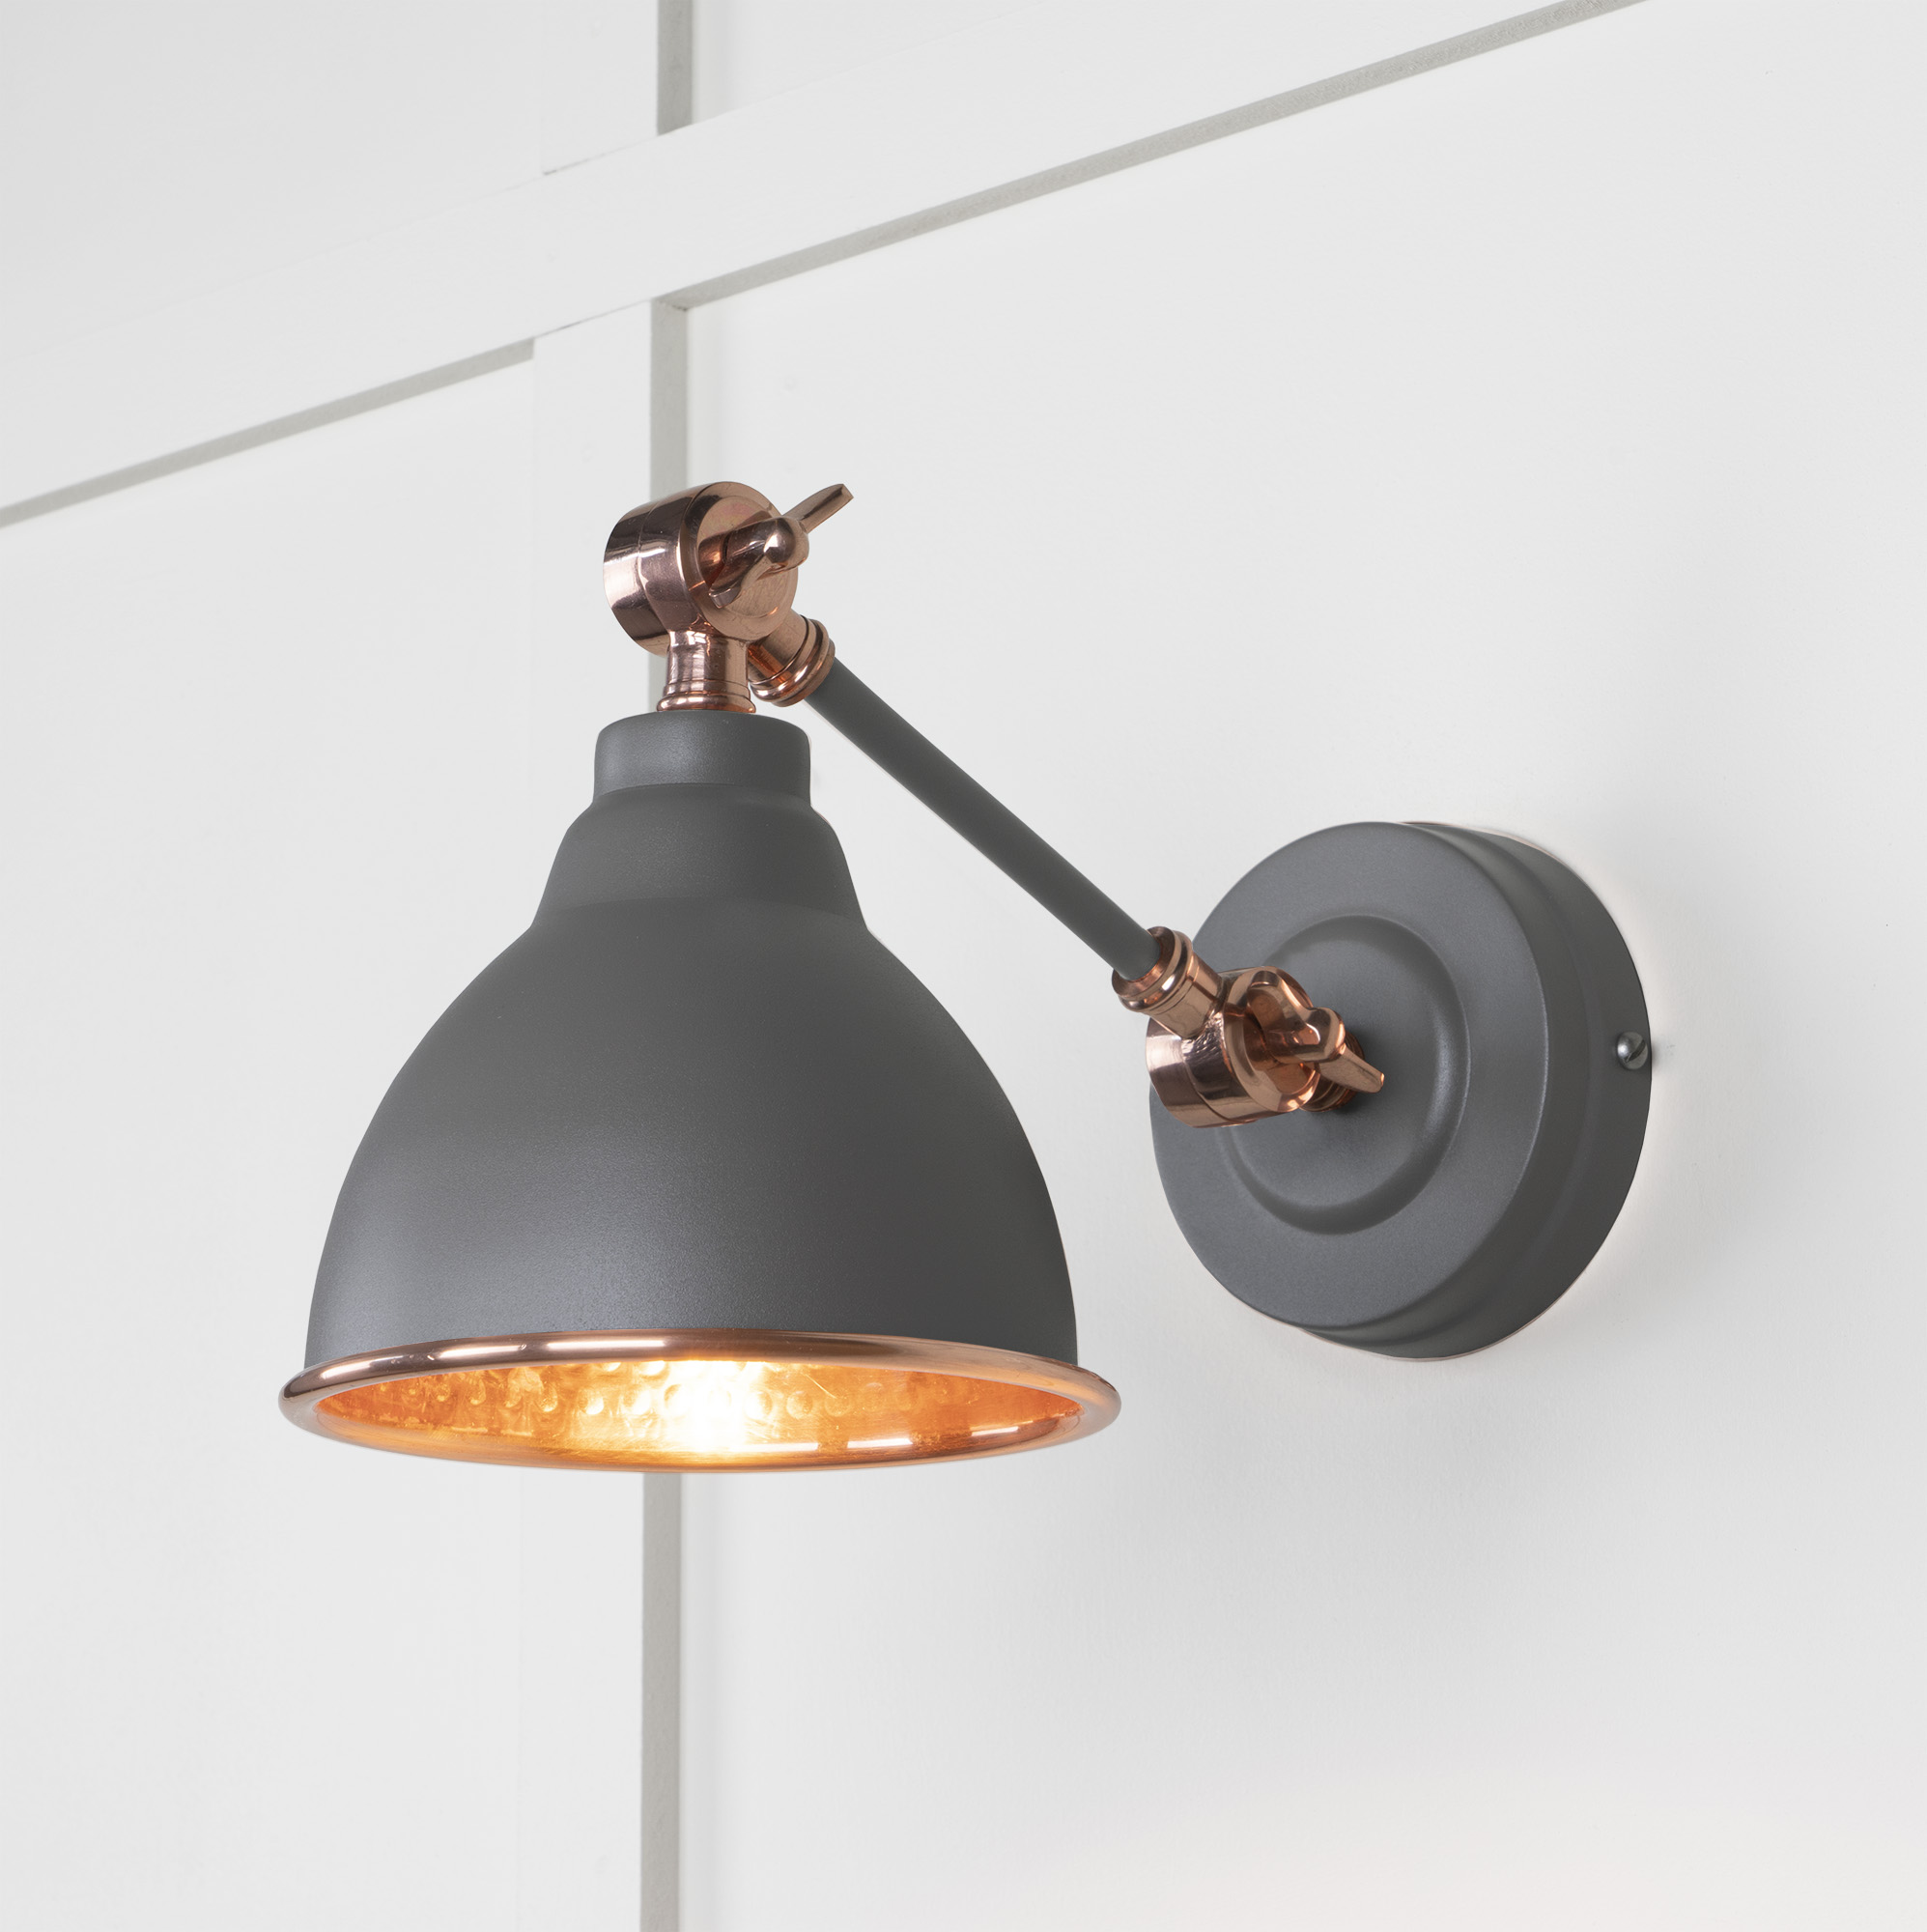 Hammered Copper Brindley Wall Light in Bluff